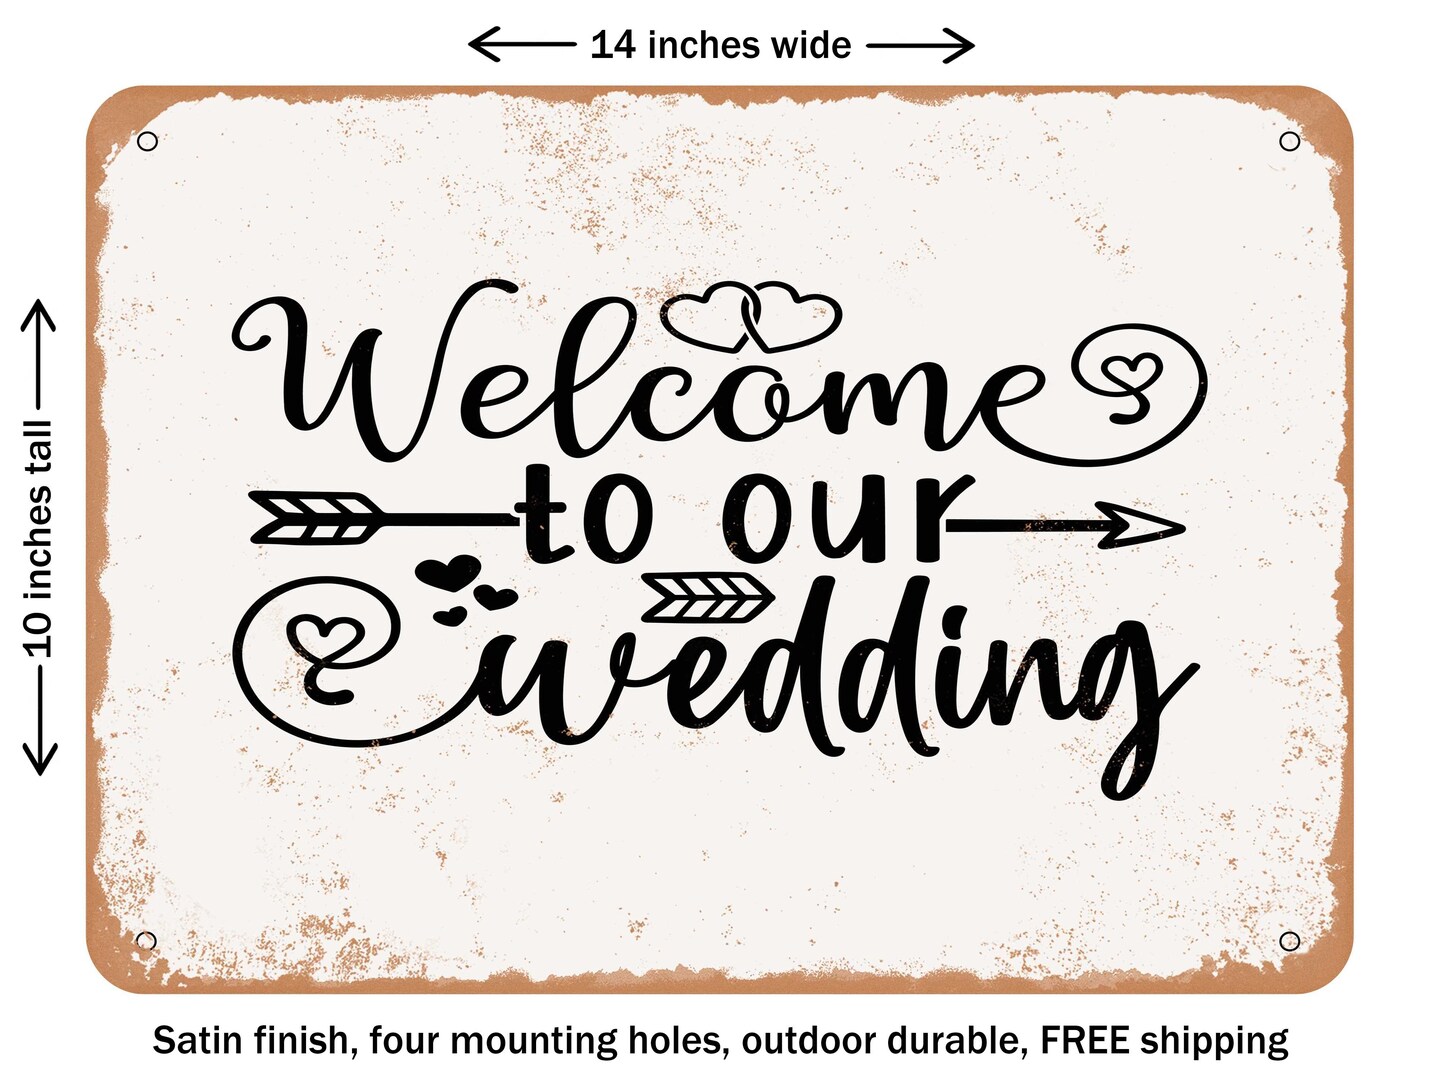 DECORATIVE METAL SIGN - Welcome to Our Our Wedding - Vintage Rusty Look